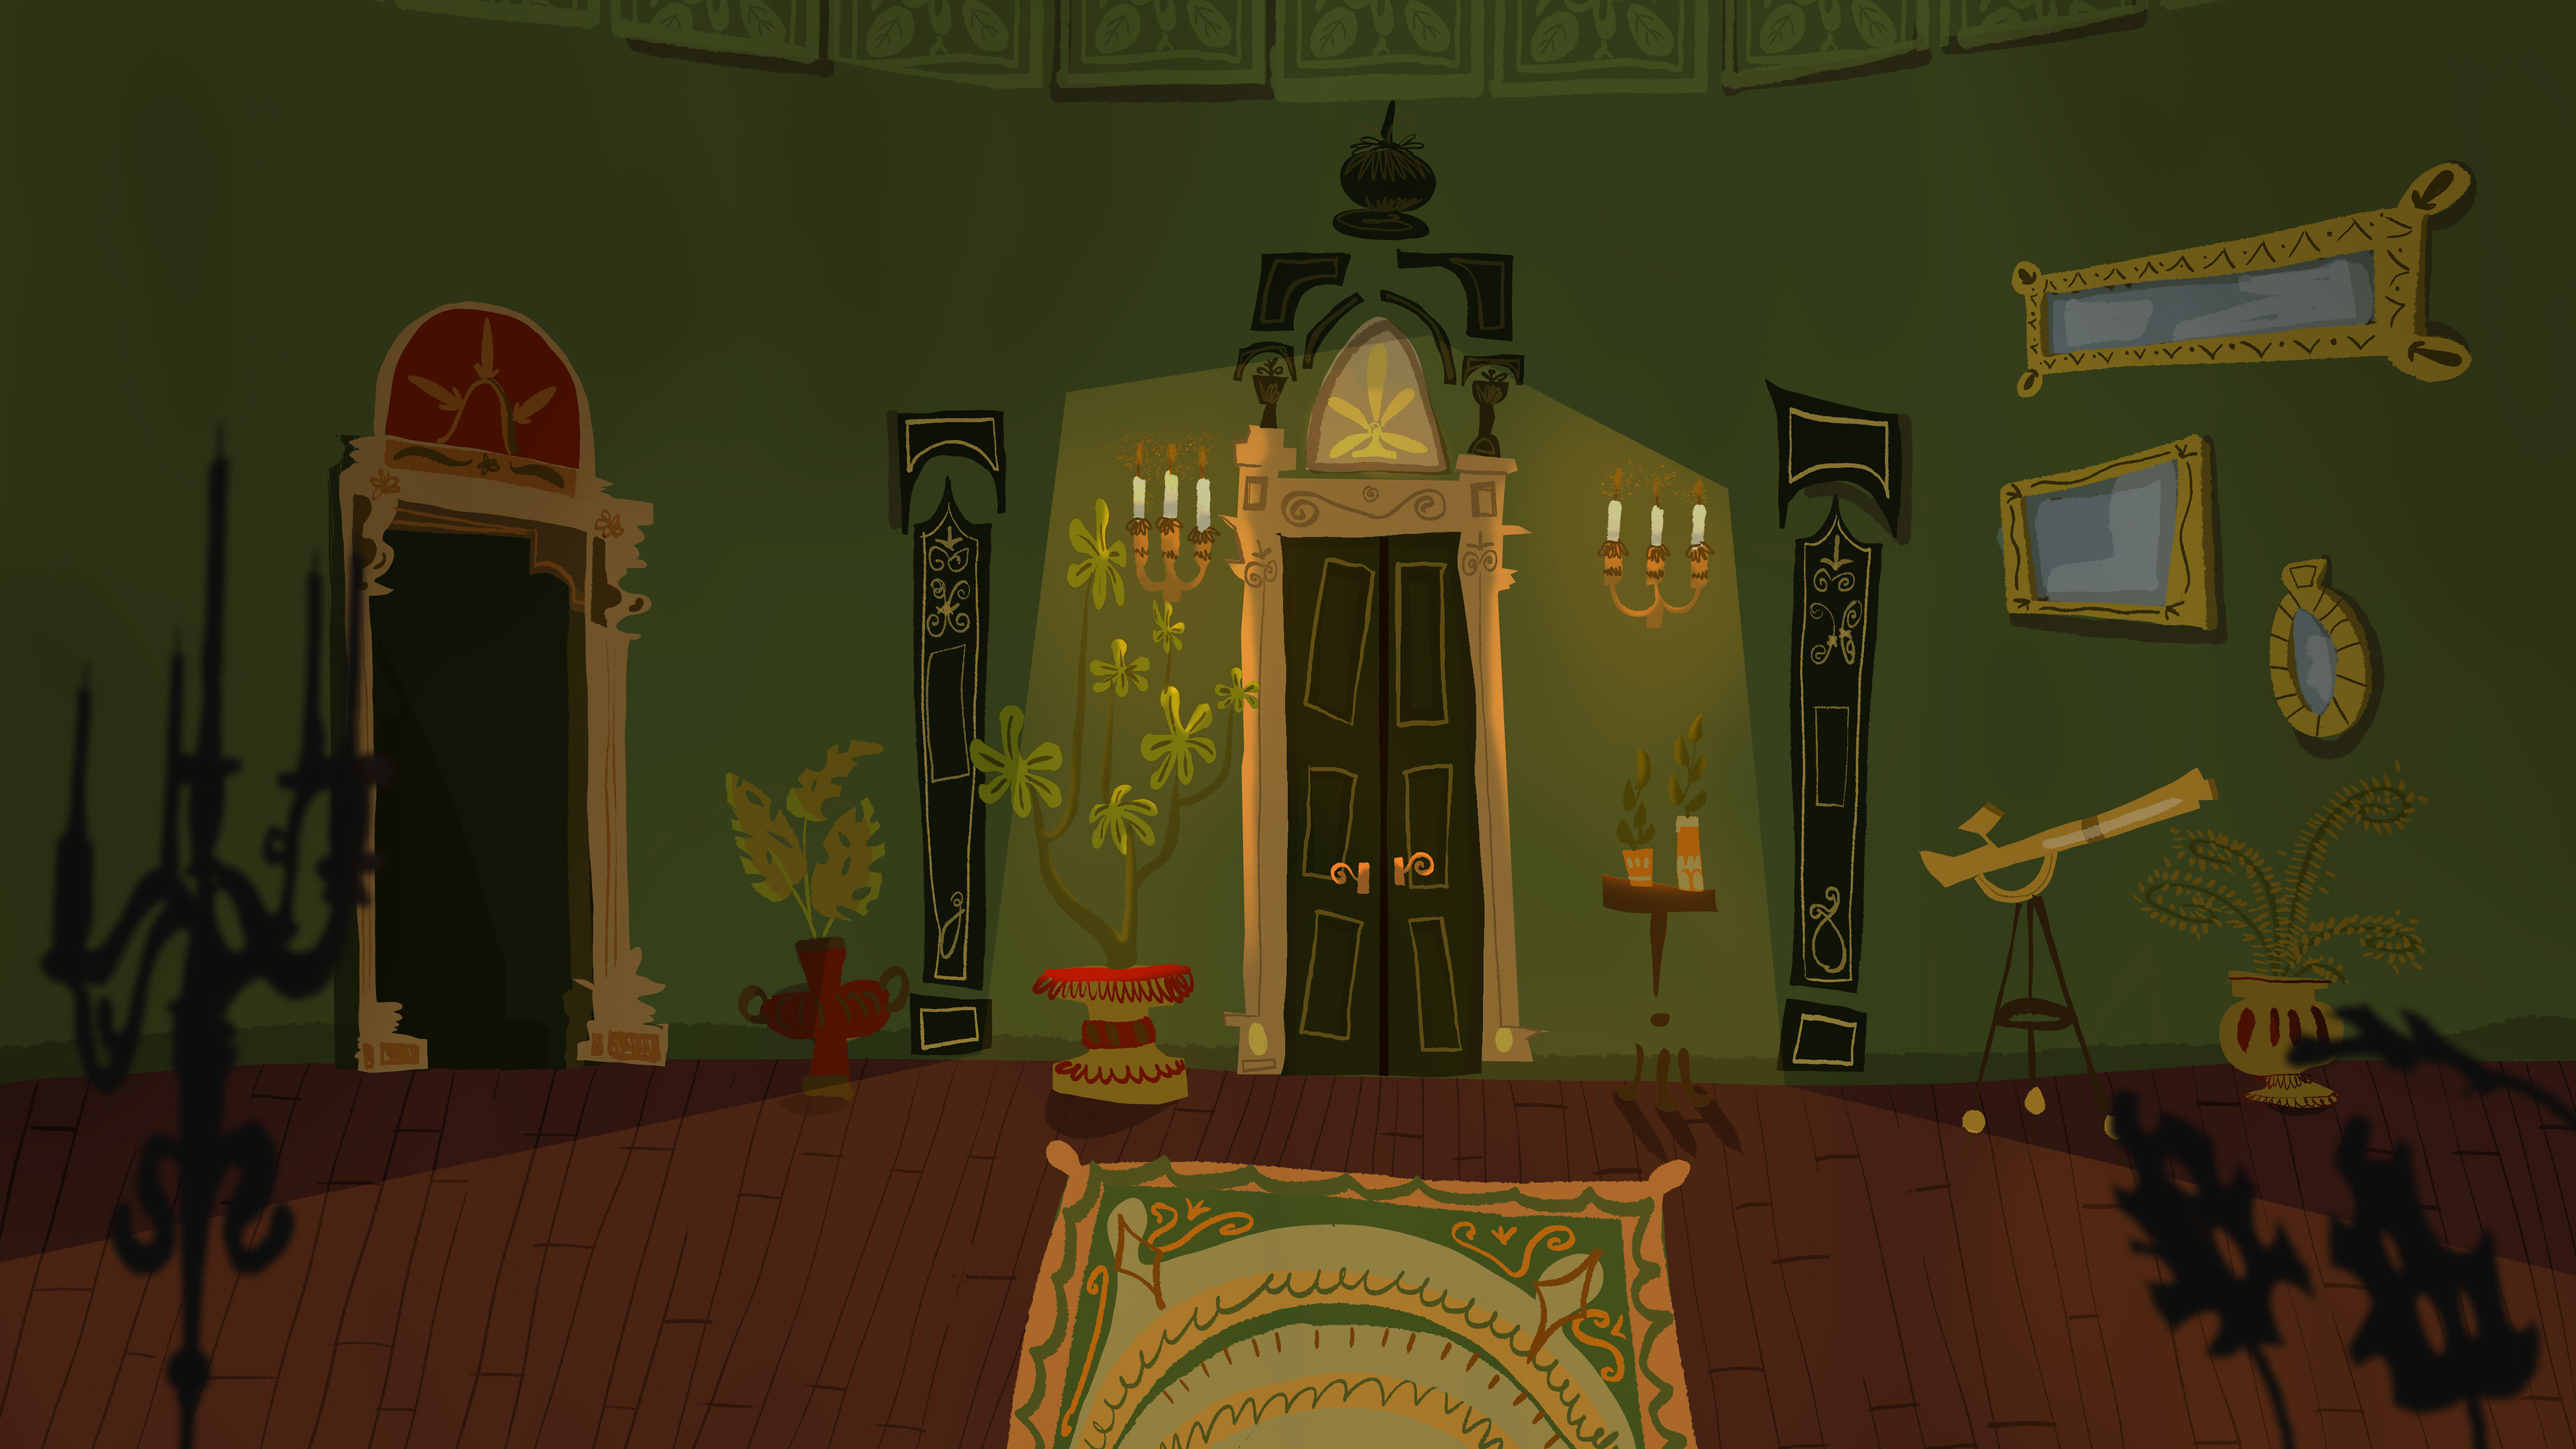 Digital drawing of interior in almost a cartoonish illustration style by Hannah Seddon - BA Production Arts for Screen.